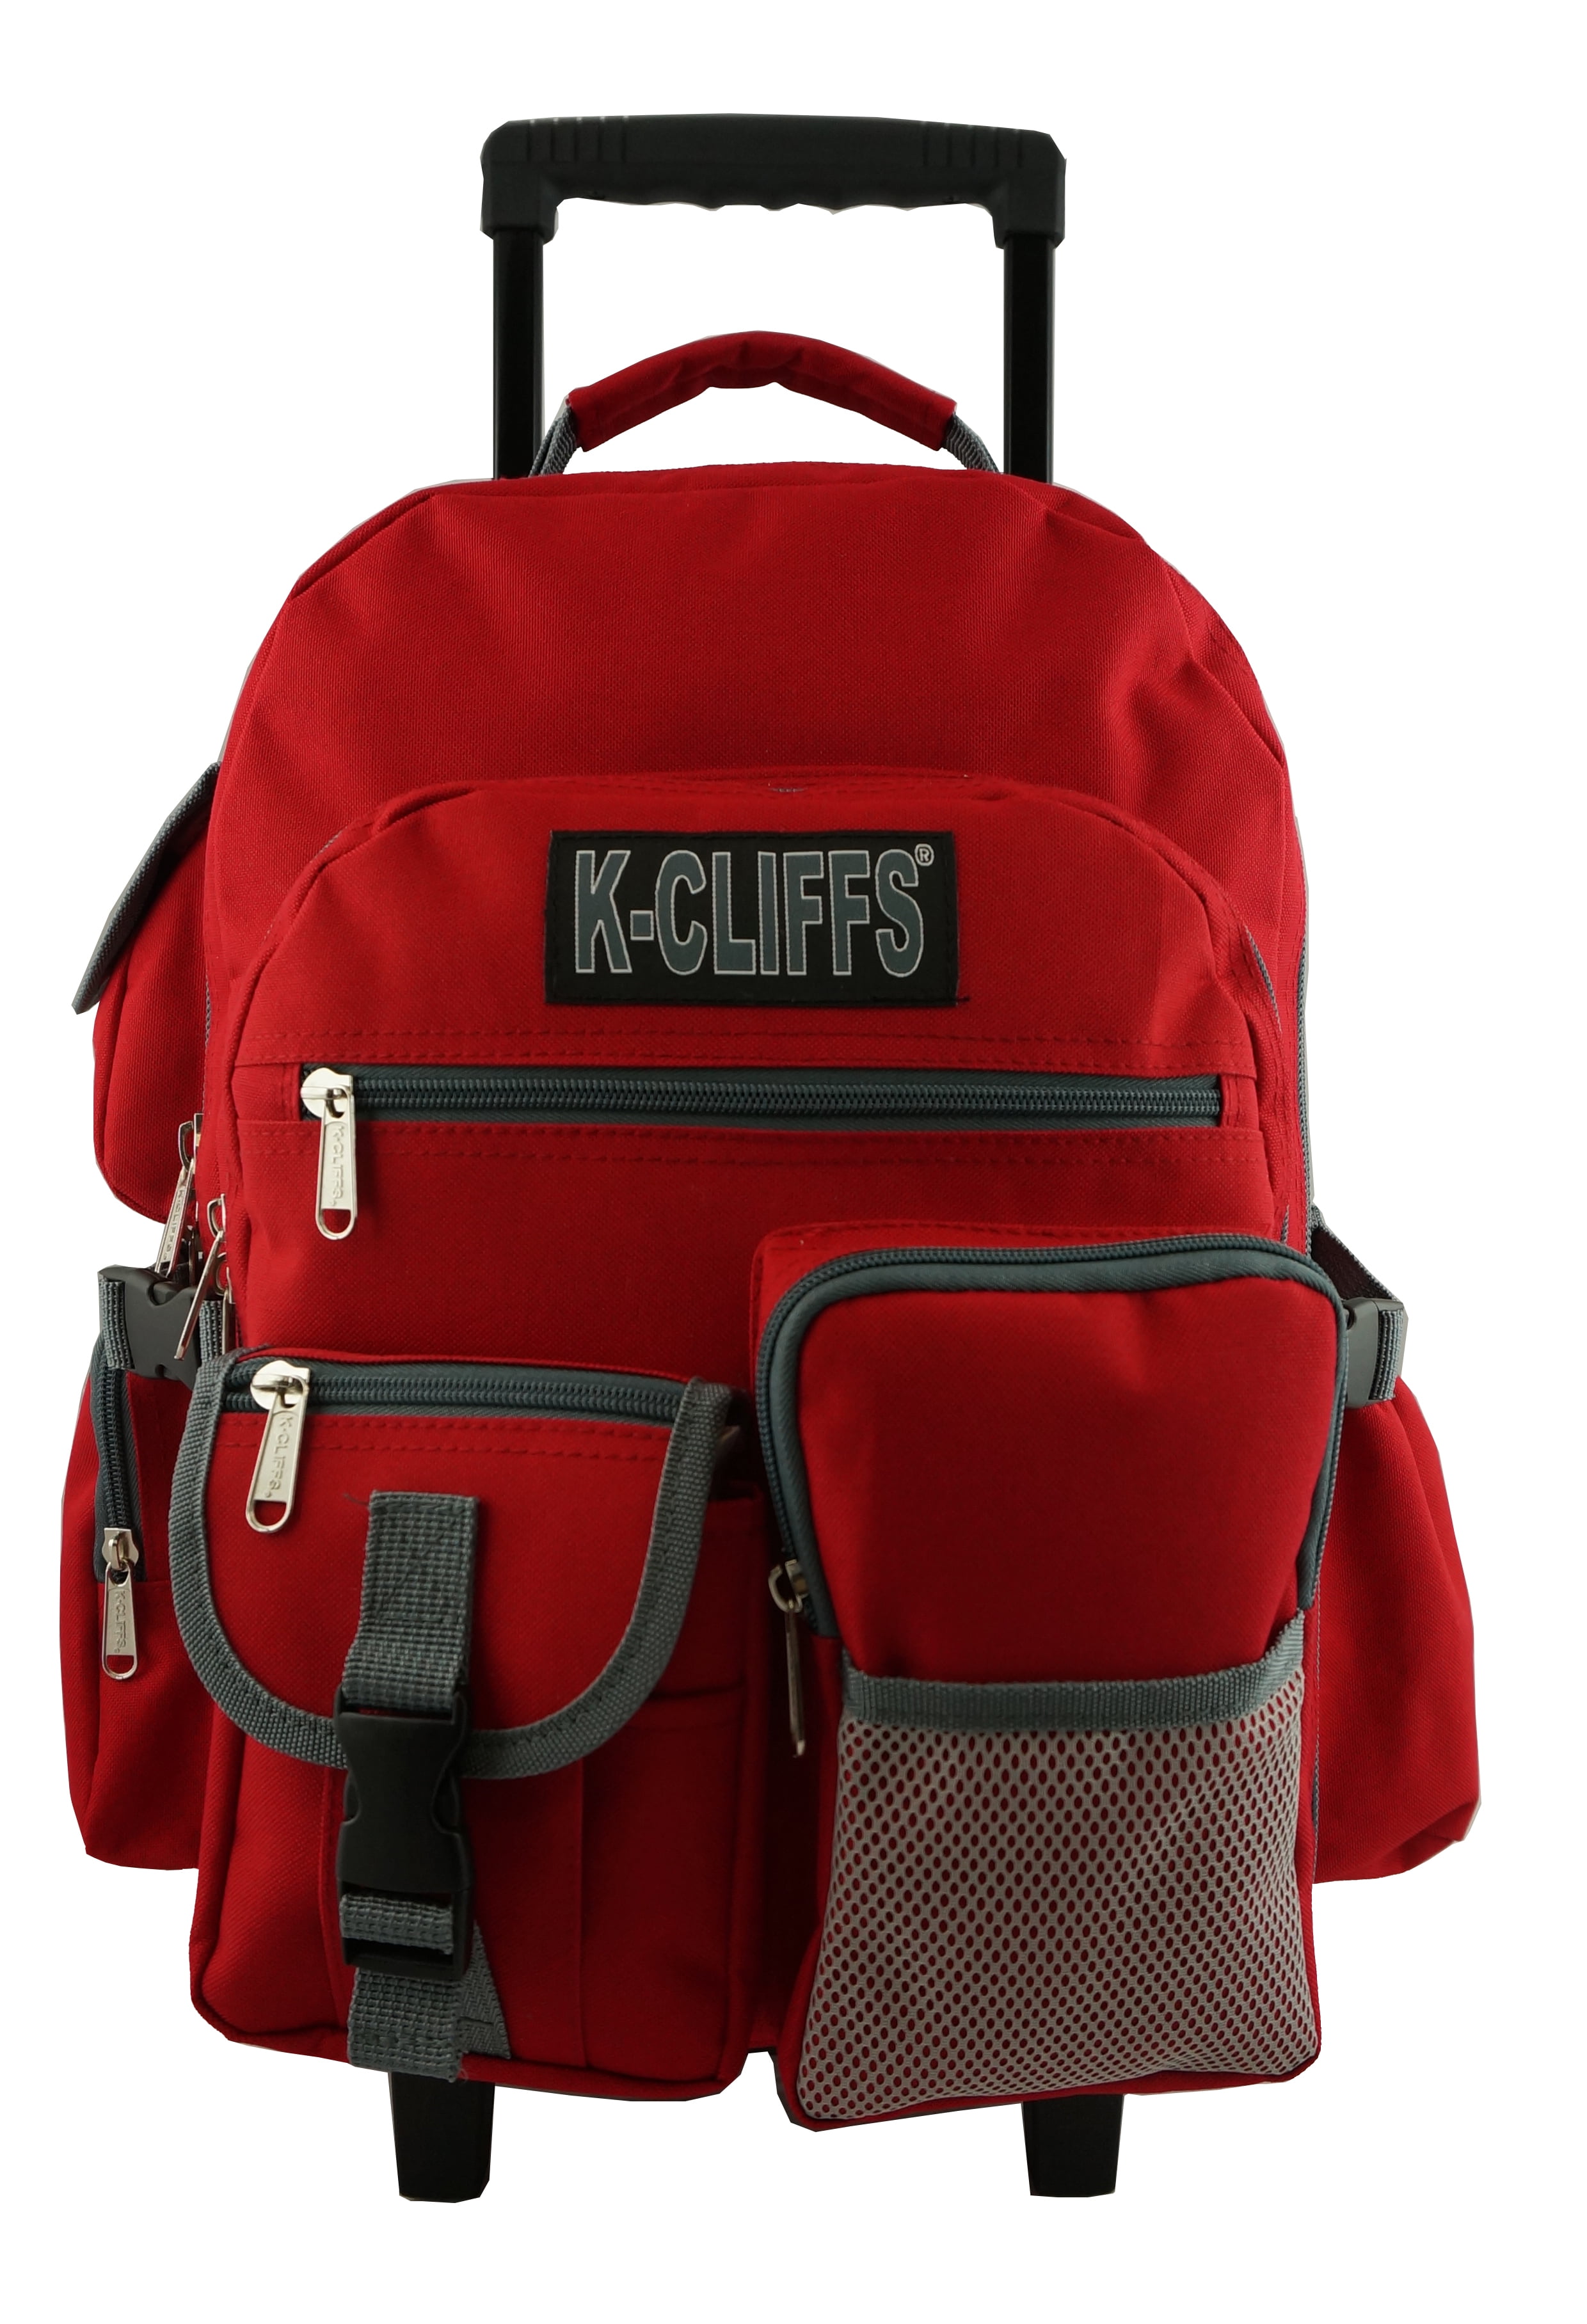 backpack for travel and school